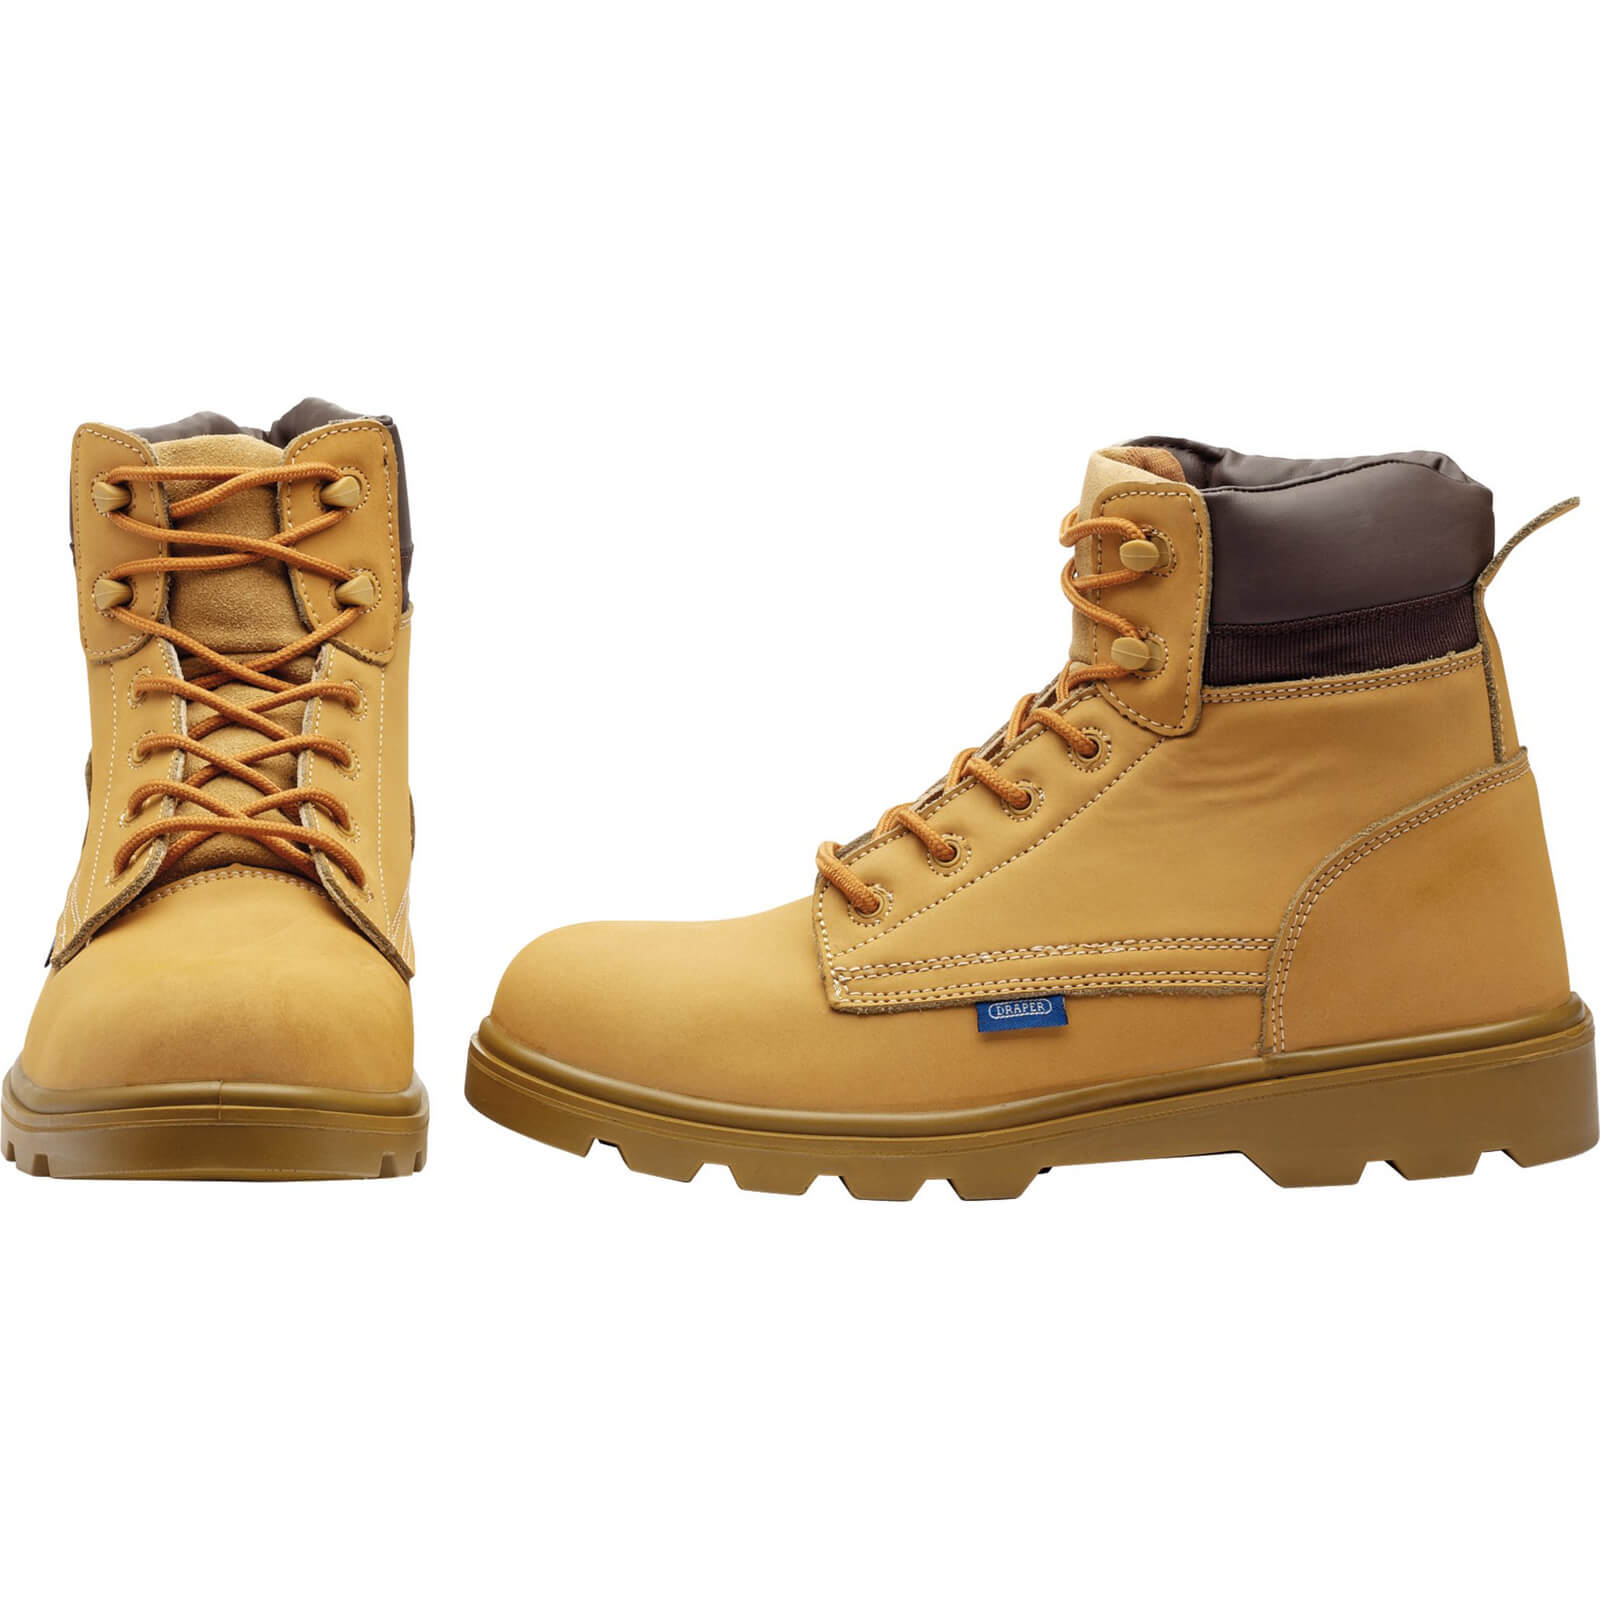 Image of Draper Mens Nubuck Style Safety Boots Tan Size 10